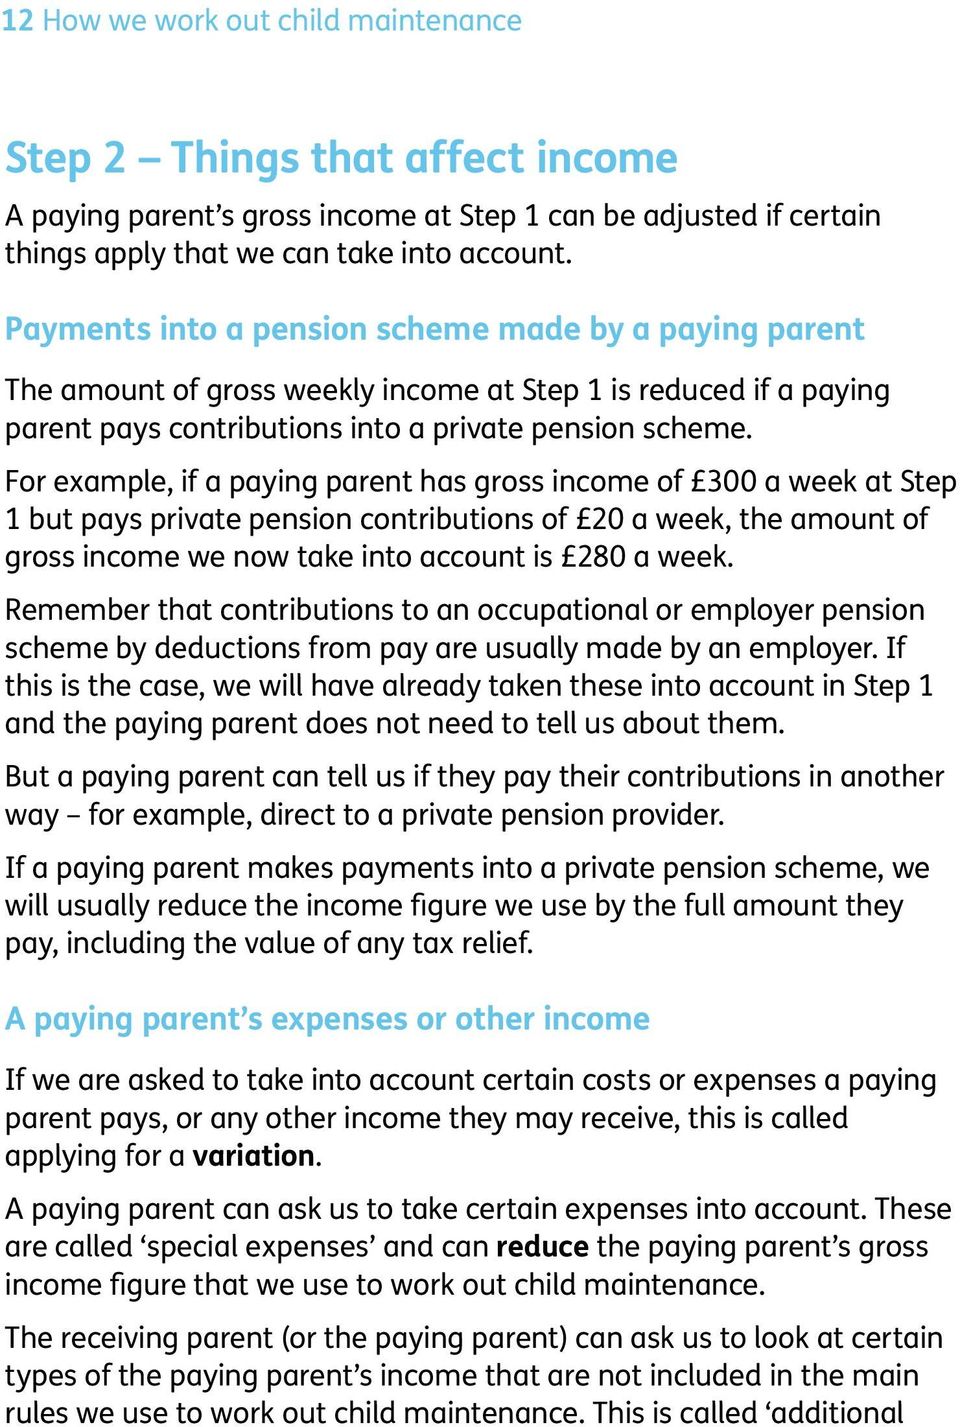 For example, if a paying parent has gross income of 300 a week at Step 1 but pays private pension contributions of 20 a week, the amount of gross income we now take into account is 280 a week.